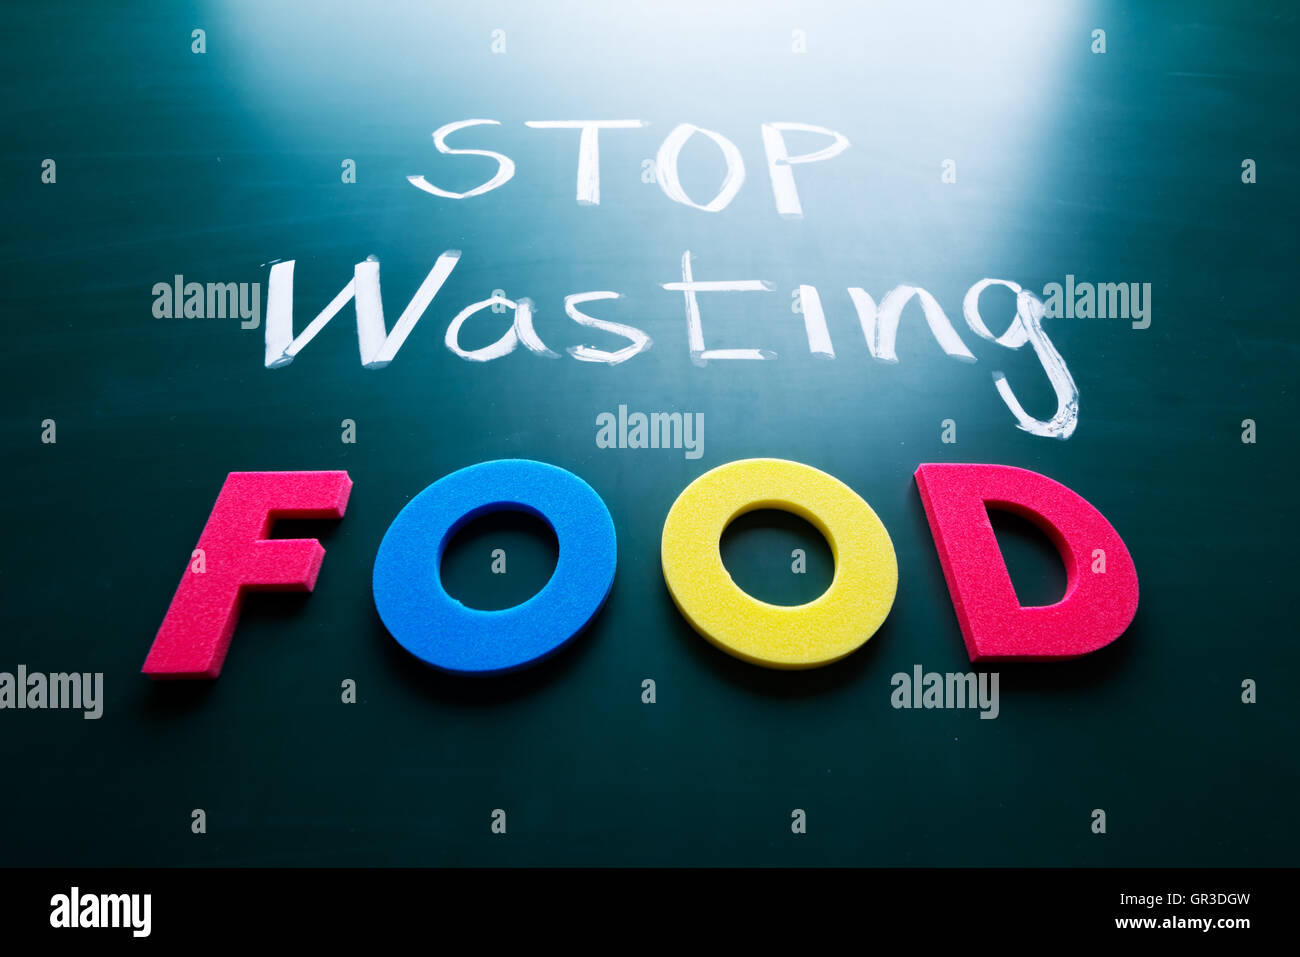 Stop wasting food concept Stock Photo